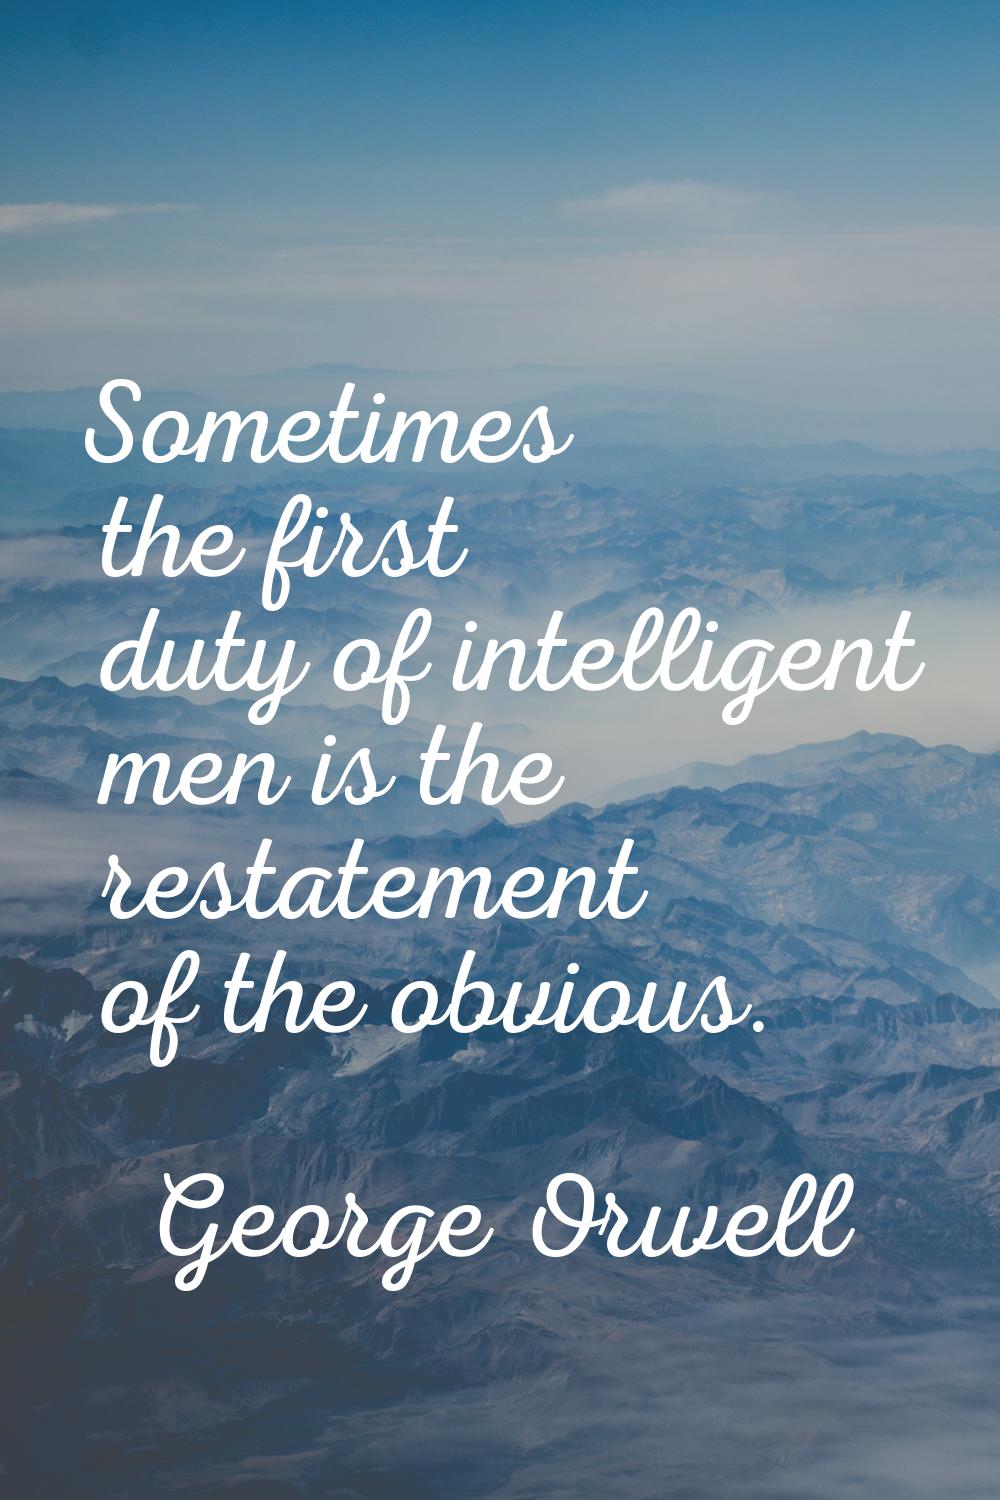 Sometimes the first duty of intelligent men is the restatement of the obvious.